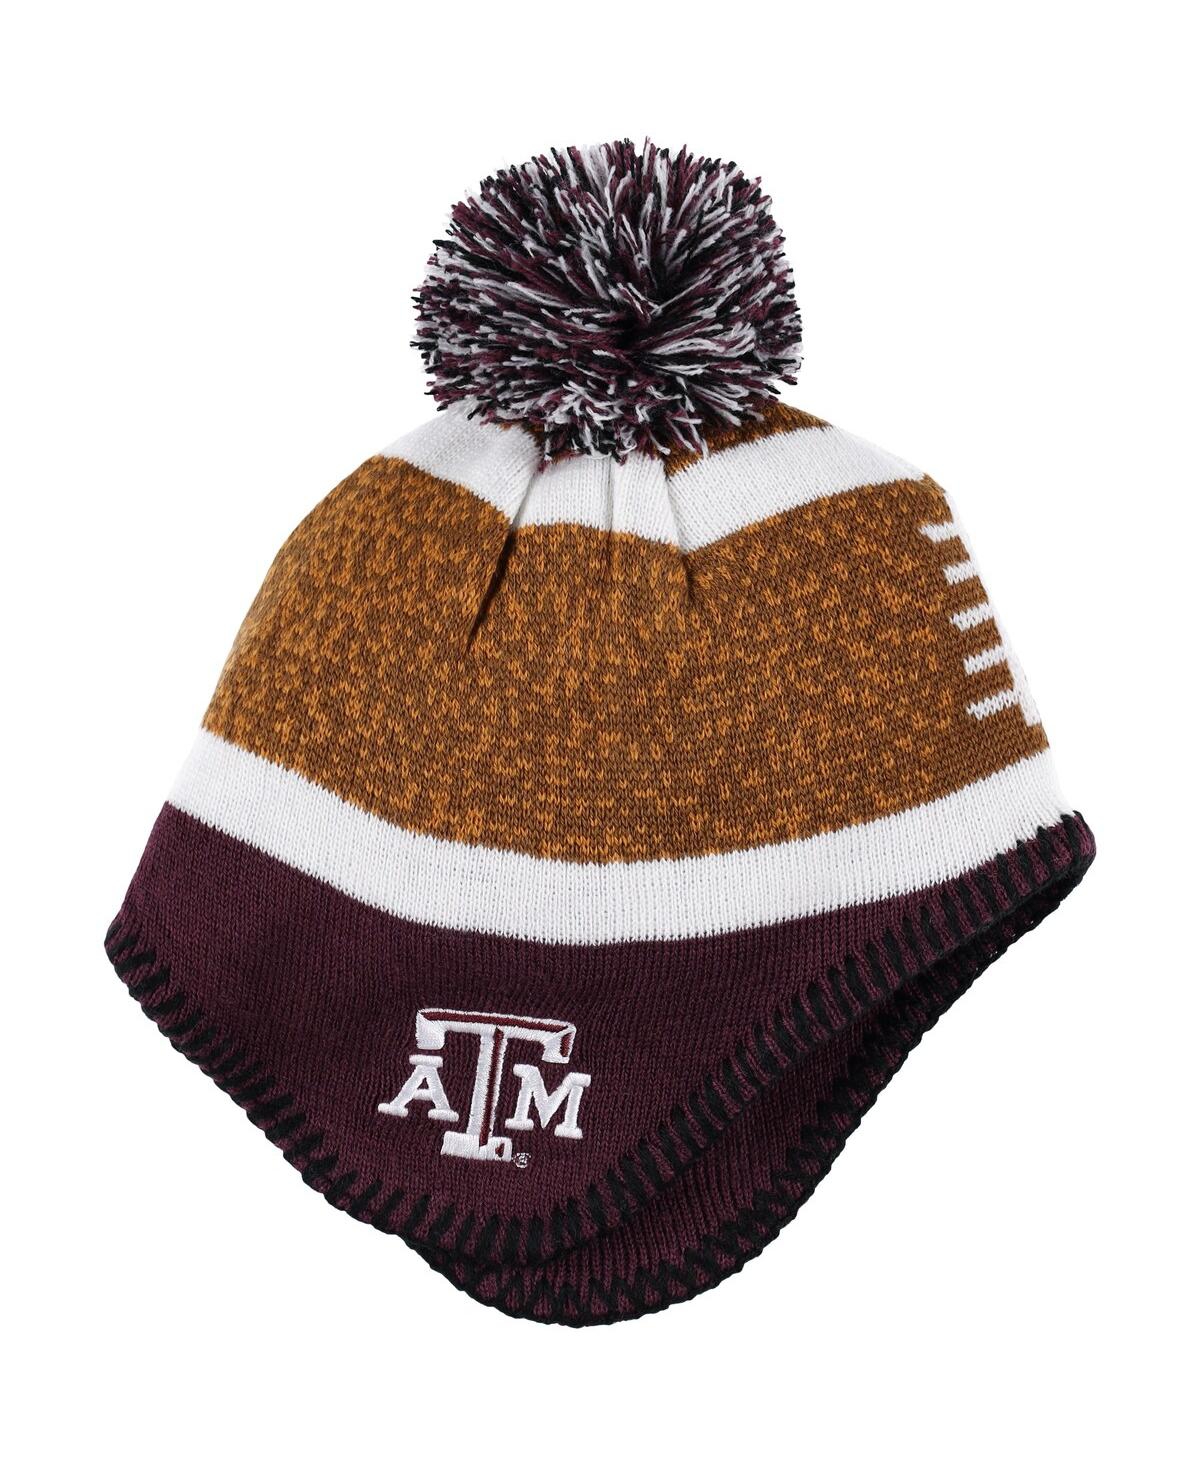 Outerstuff Babies' Little Boys And Girls Brown, Maroon Texas A&m Aggies Football Head Knit Hat With Pom